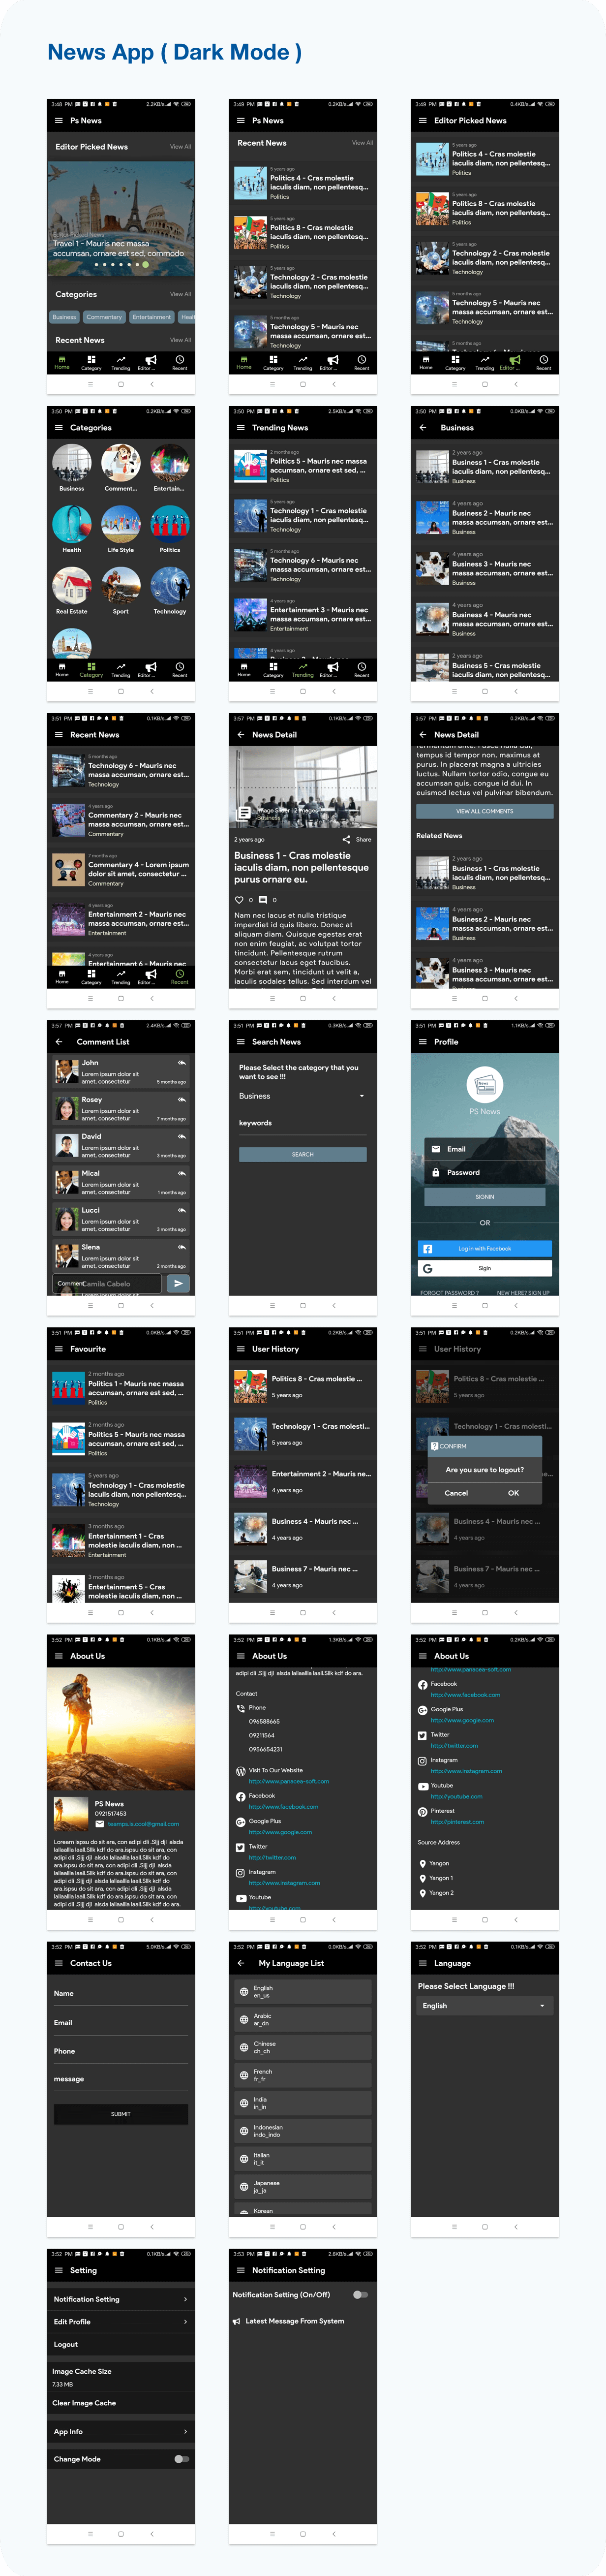 FlutterX (Flutter UI Kits Widgets and Template Collection For iOS & Android) 1.1 - 14